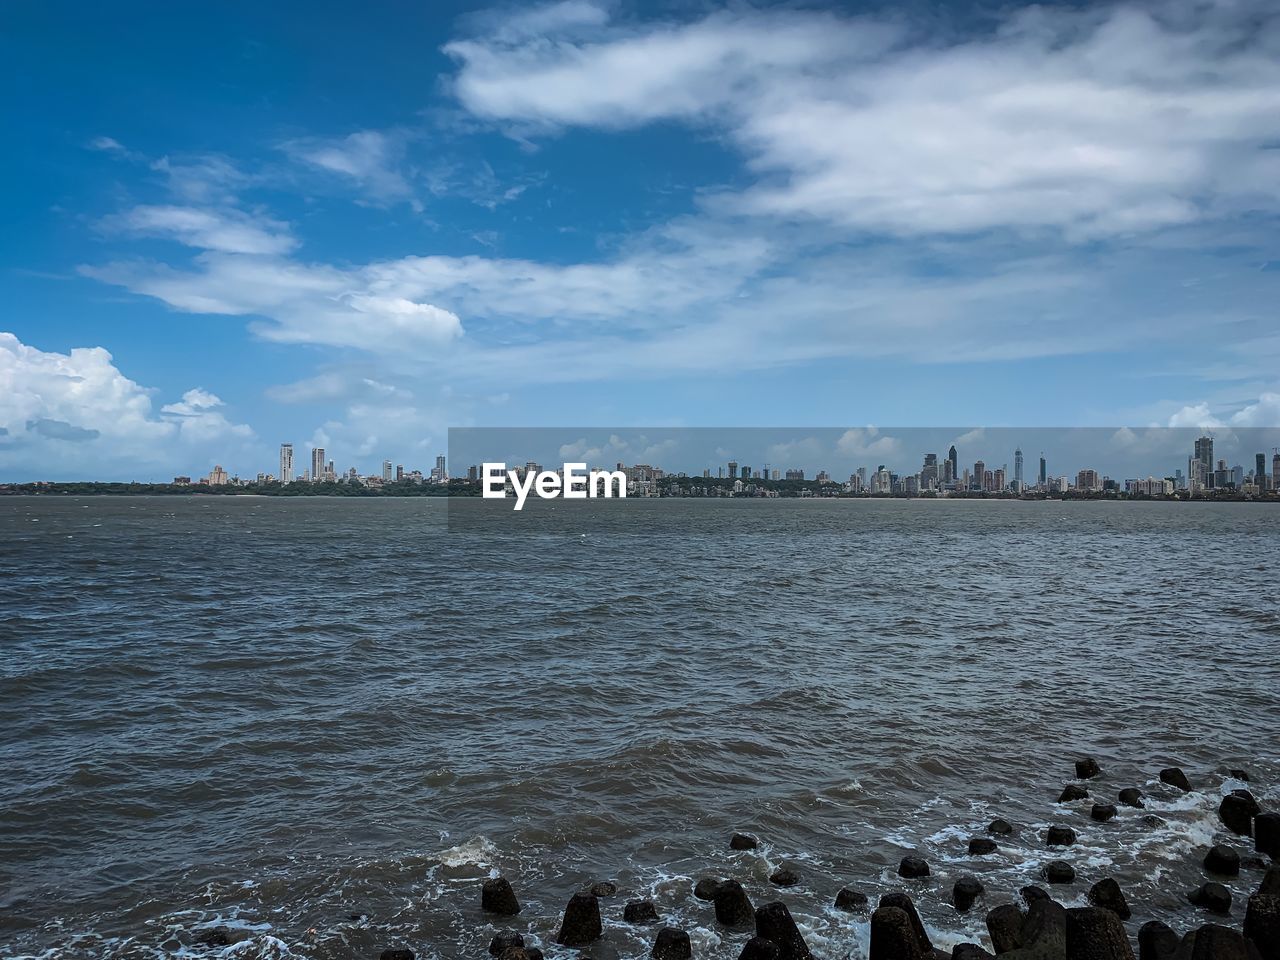 SCENIC VIEW OF SEA BY CITY AGAINST SKY